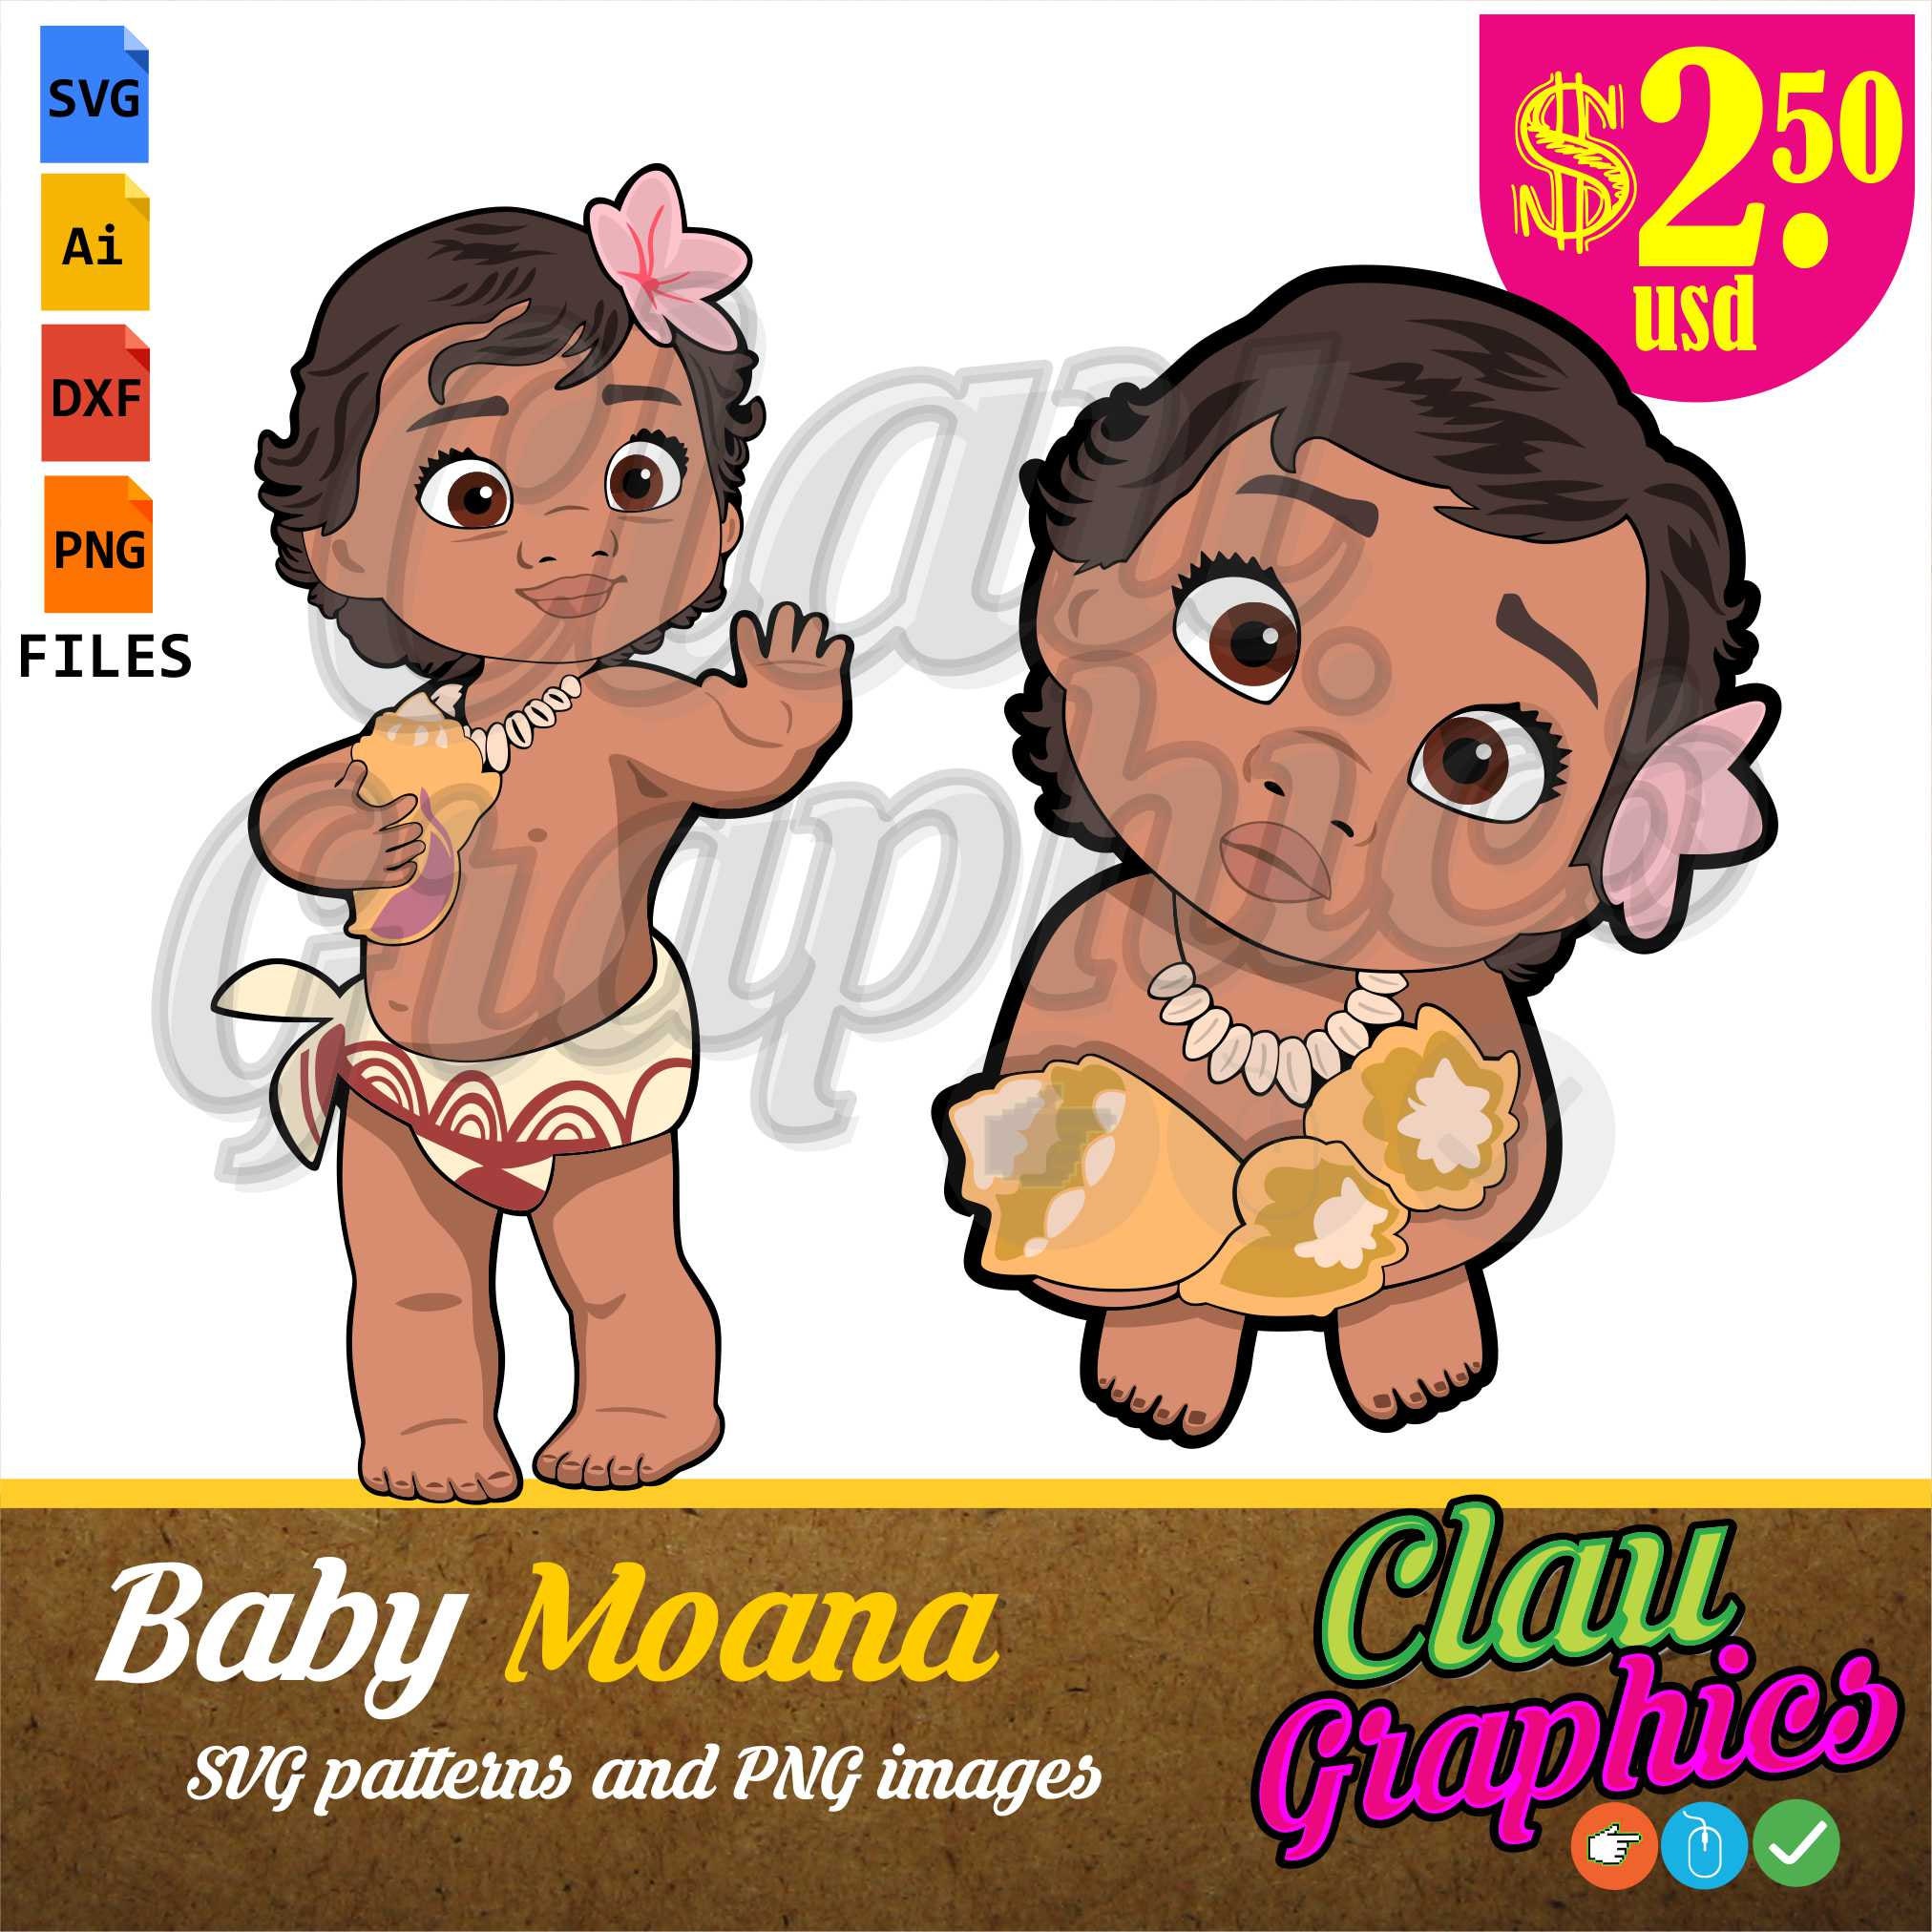 Download Baby MOANA movie digital collection, SVG patterns and ...